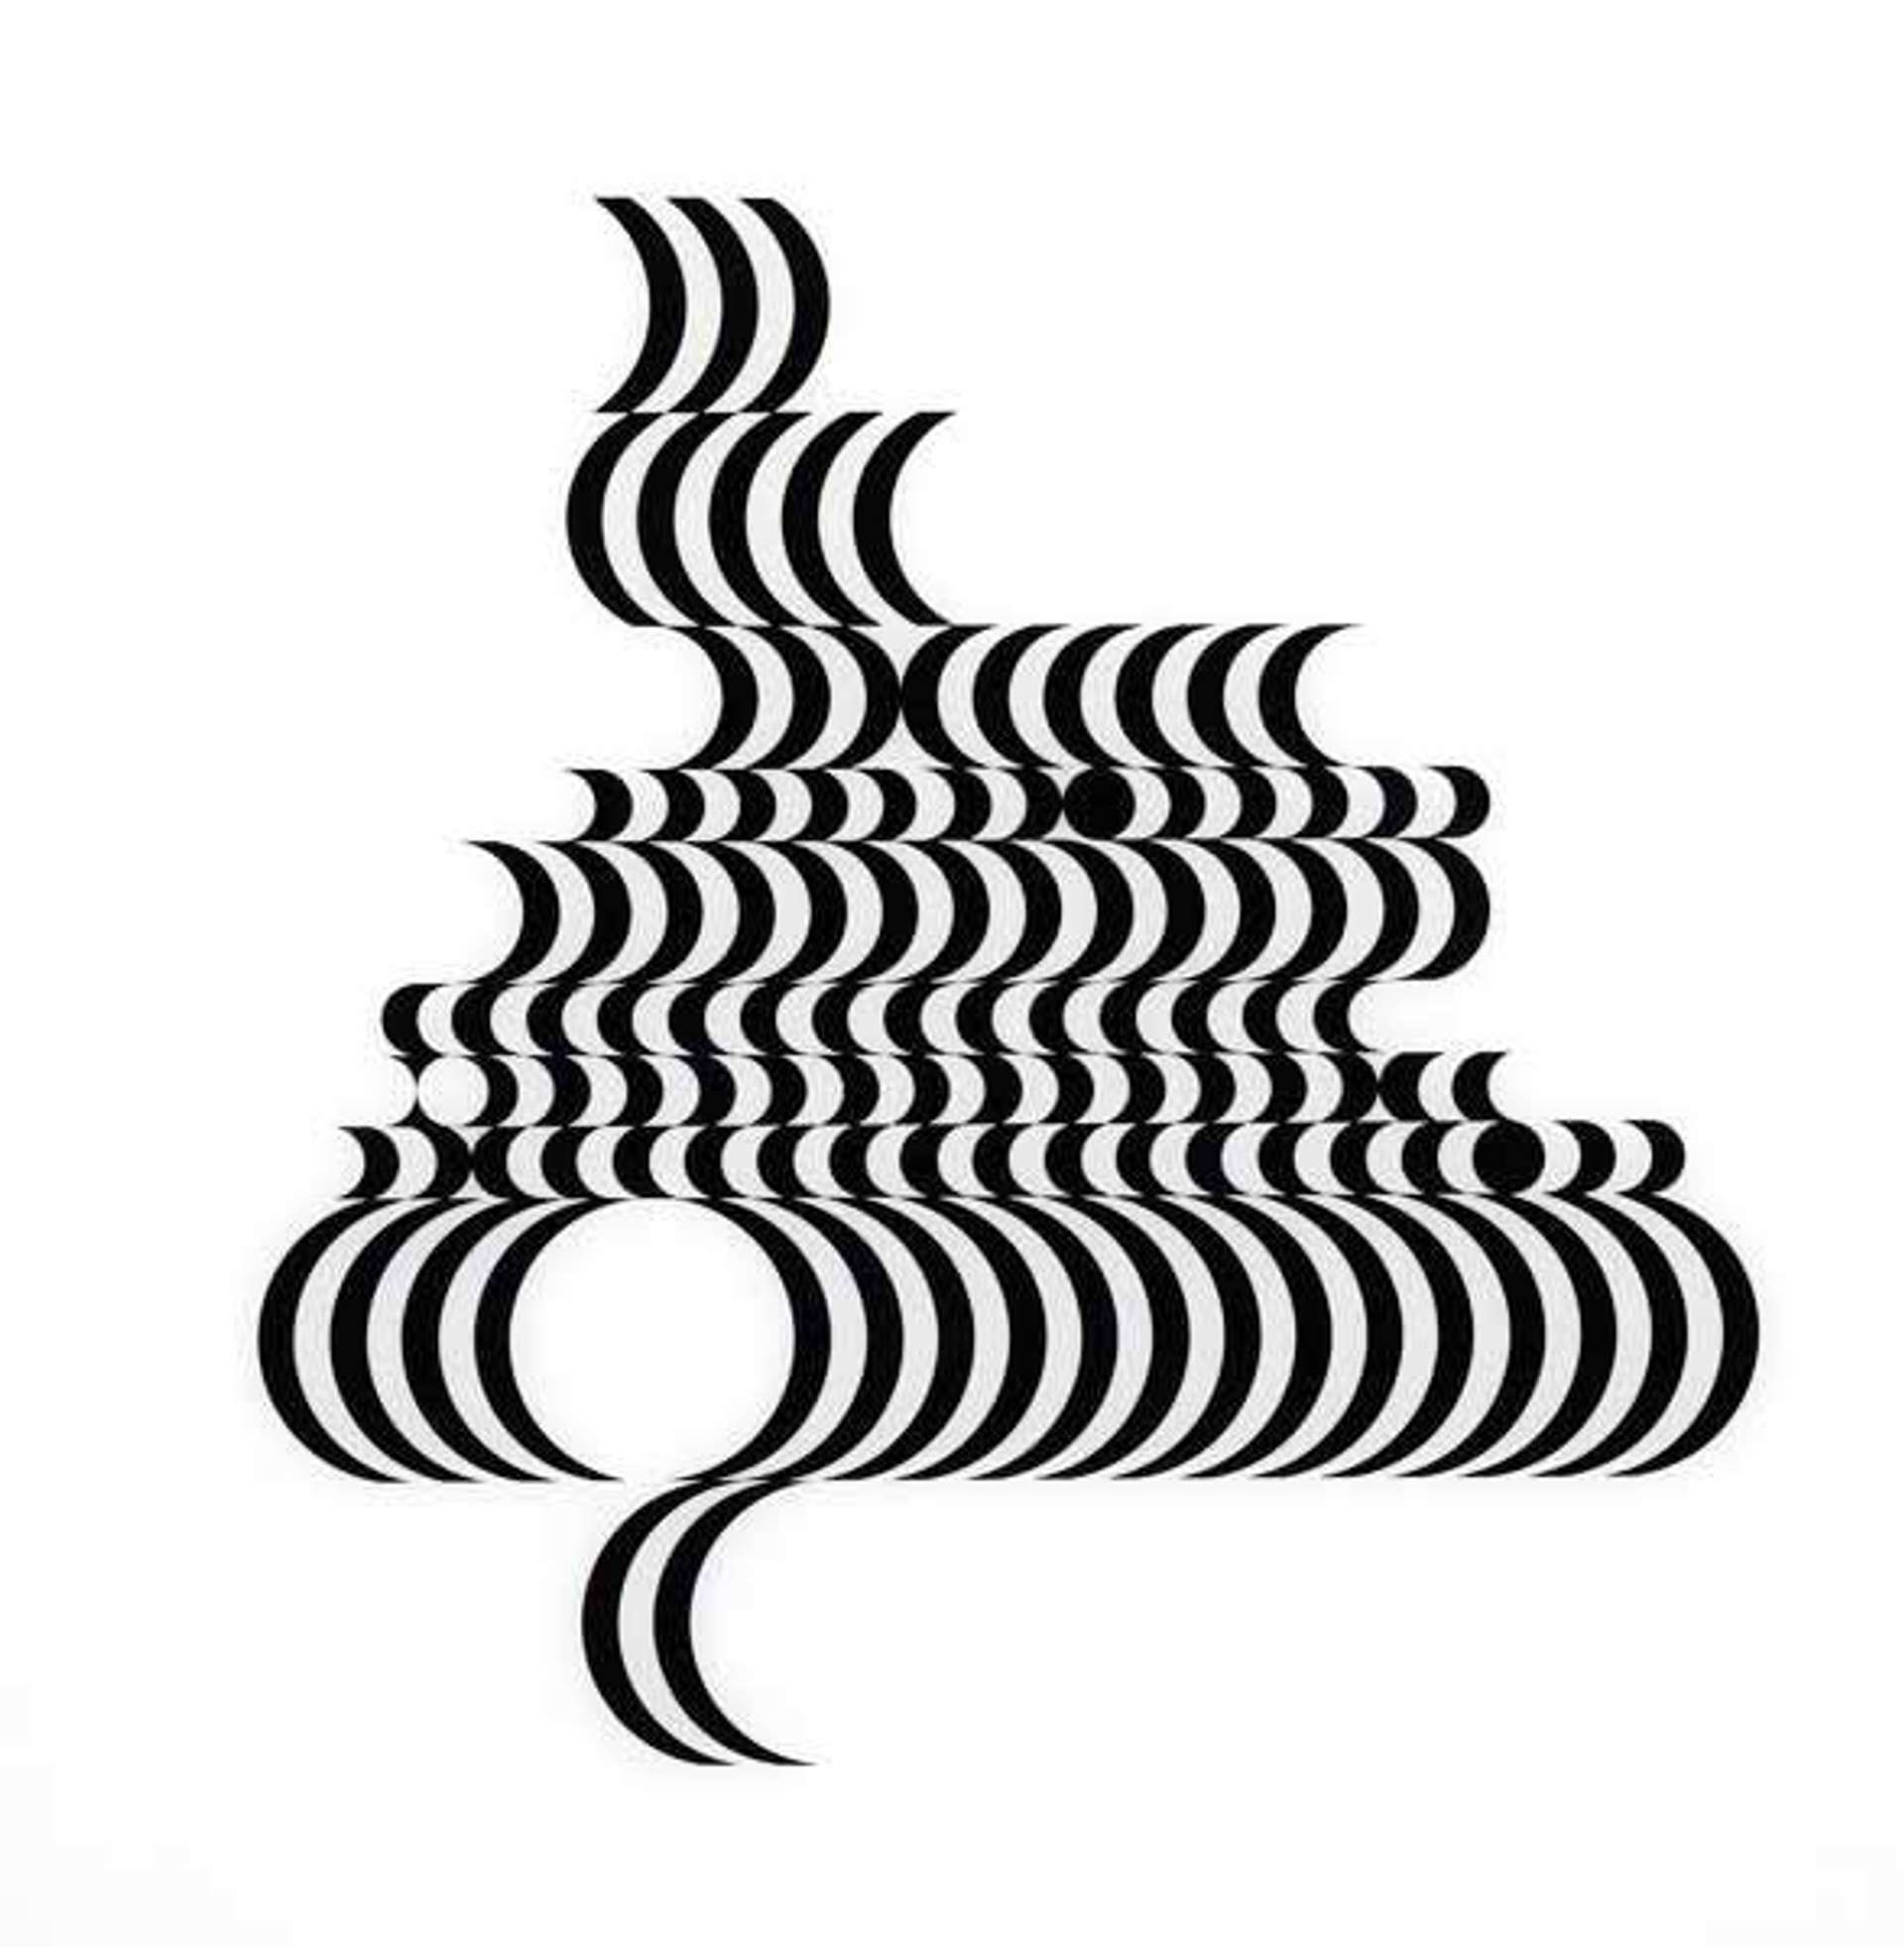 A dizzying pattern in black ink against a white background. Various lines curve to create an optical illusion.